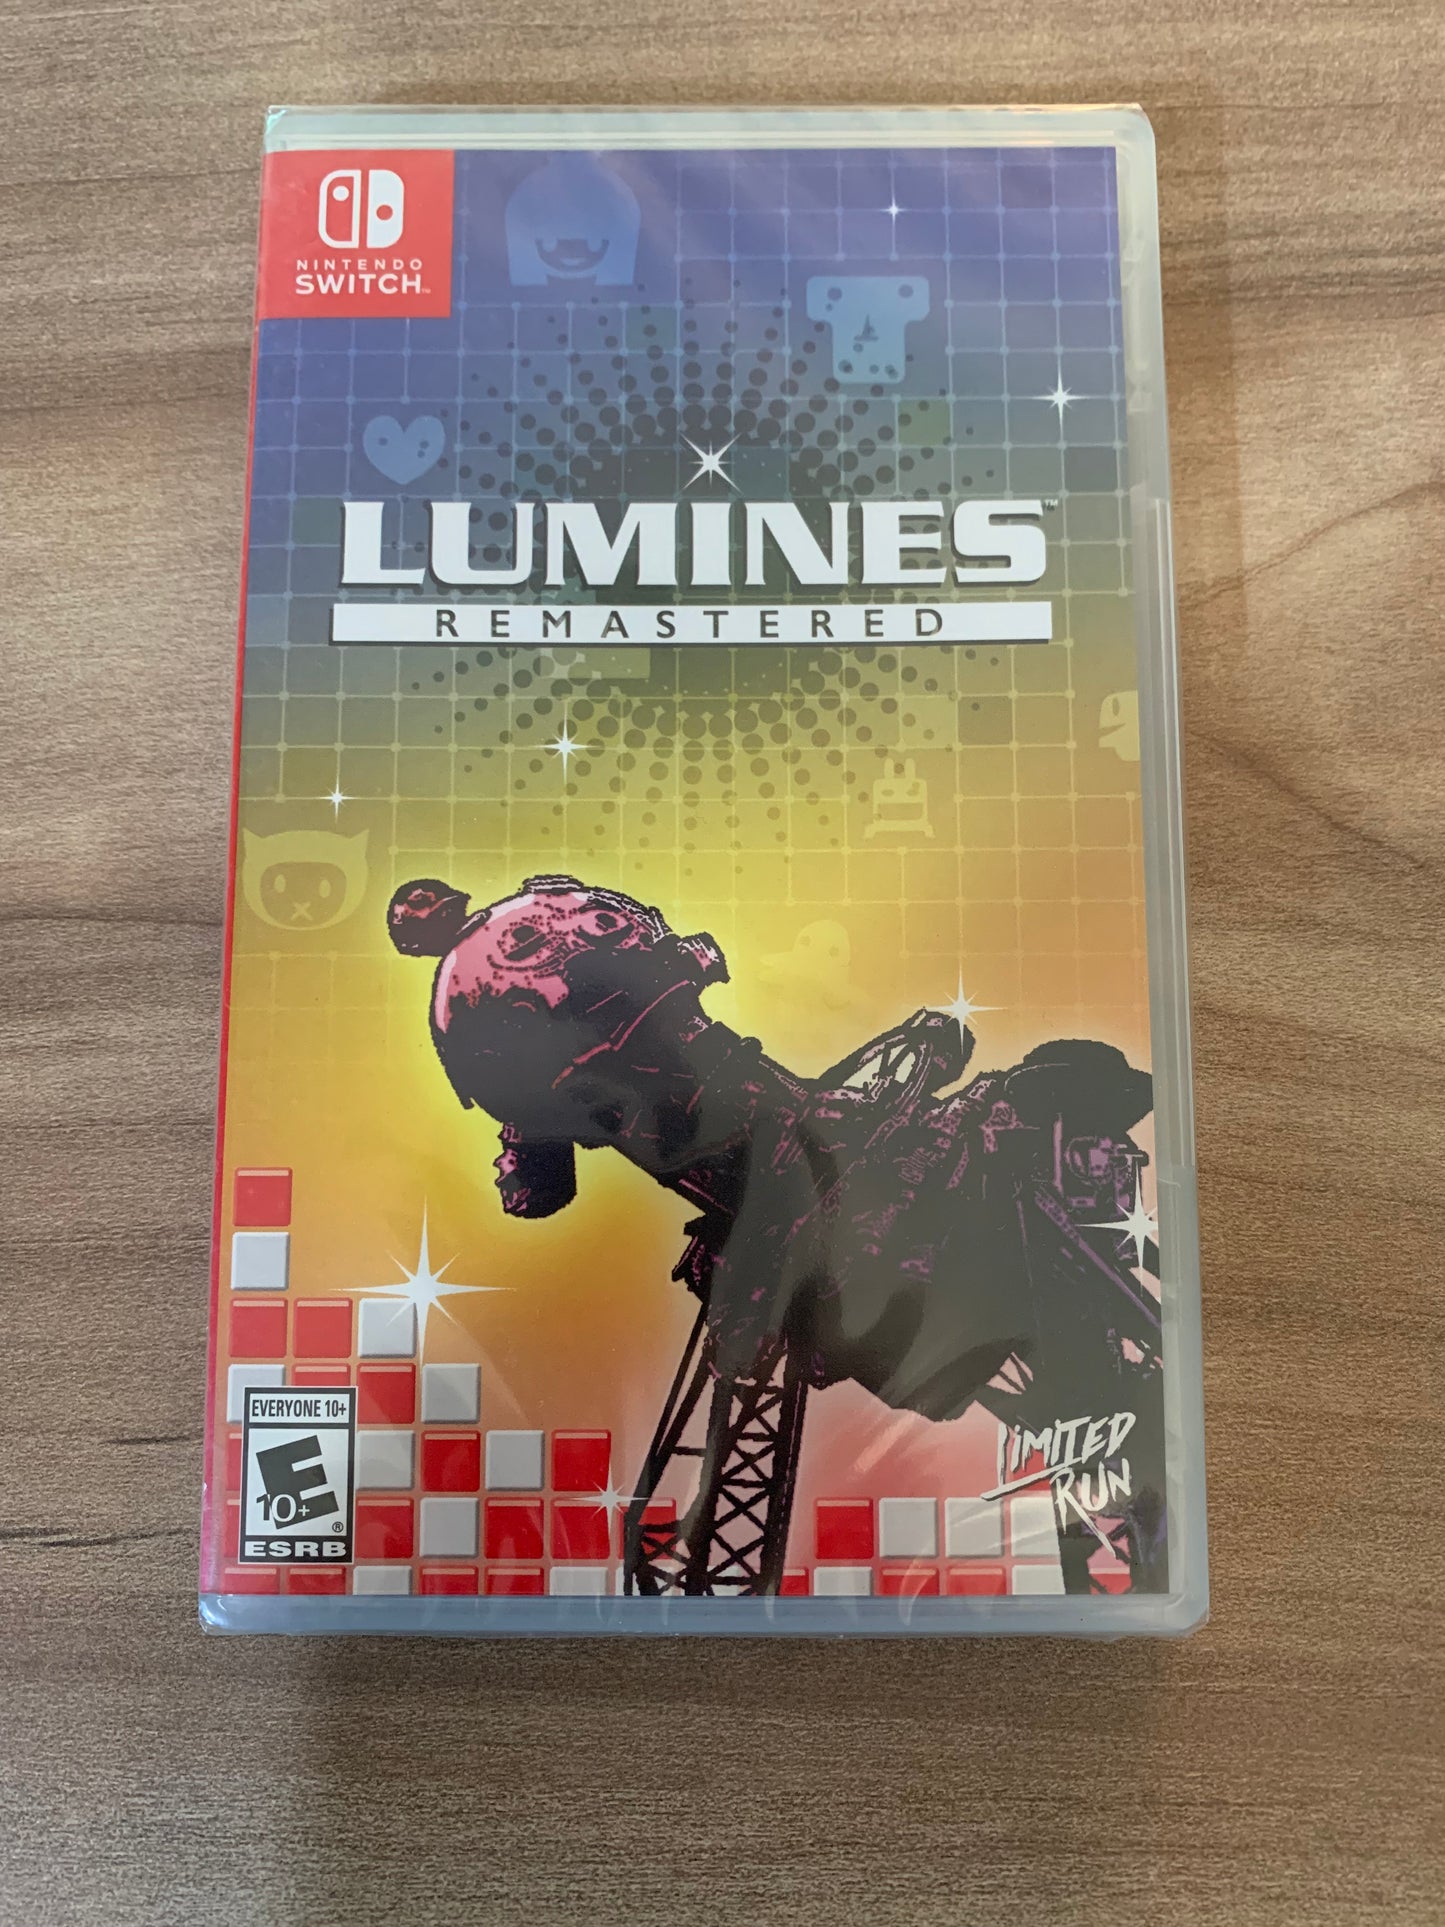 PiXEL-RETRO.COM : NINTENDO SWITCH NEW SEALED IN BOX COMPLETE MANUAL GAME NTSC LUMiNES REMASTERED